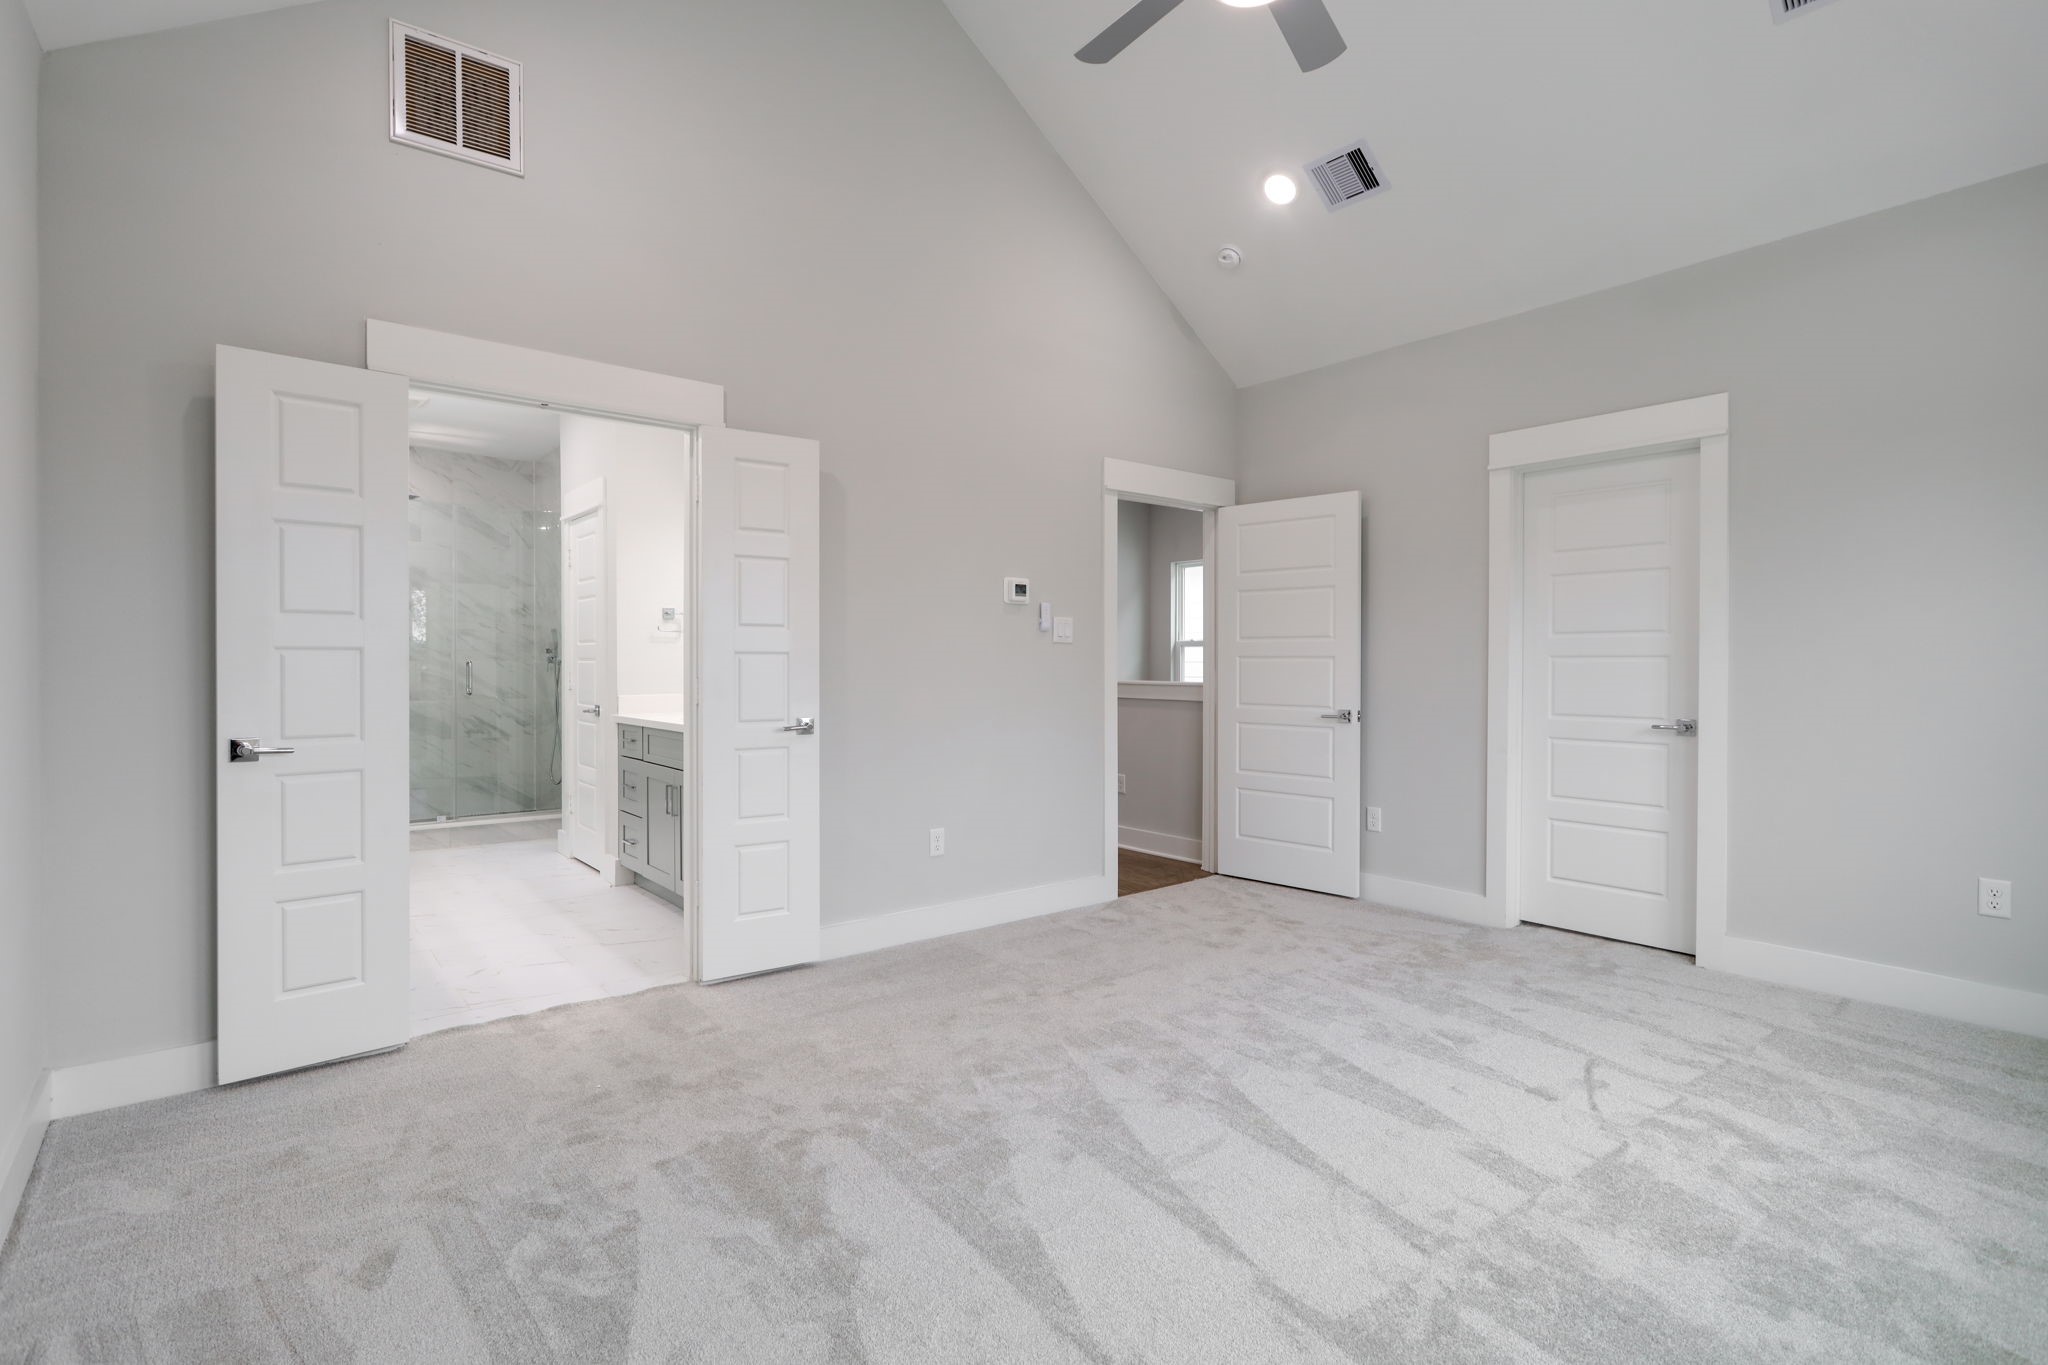 The primary walk-in closet that's located by the entrance is filled with natural light and is approximately 10 x 7.